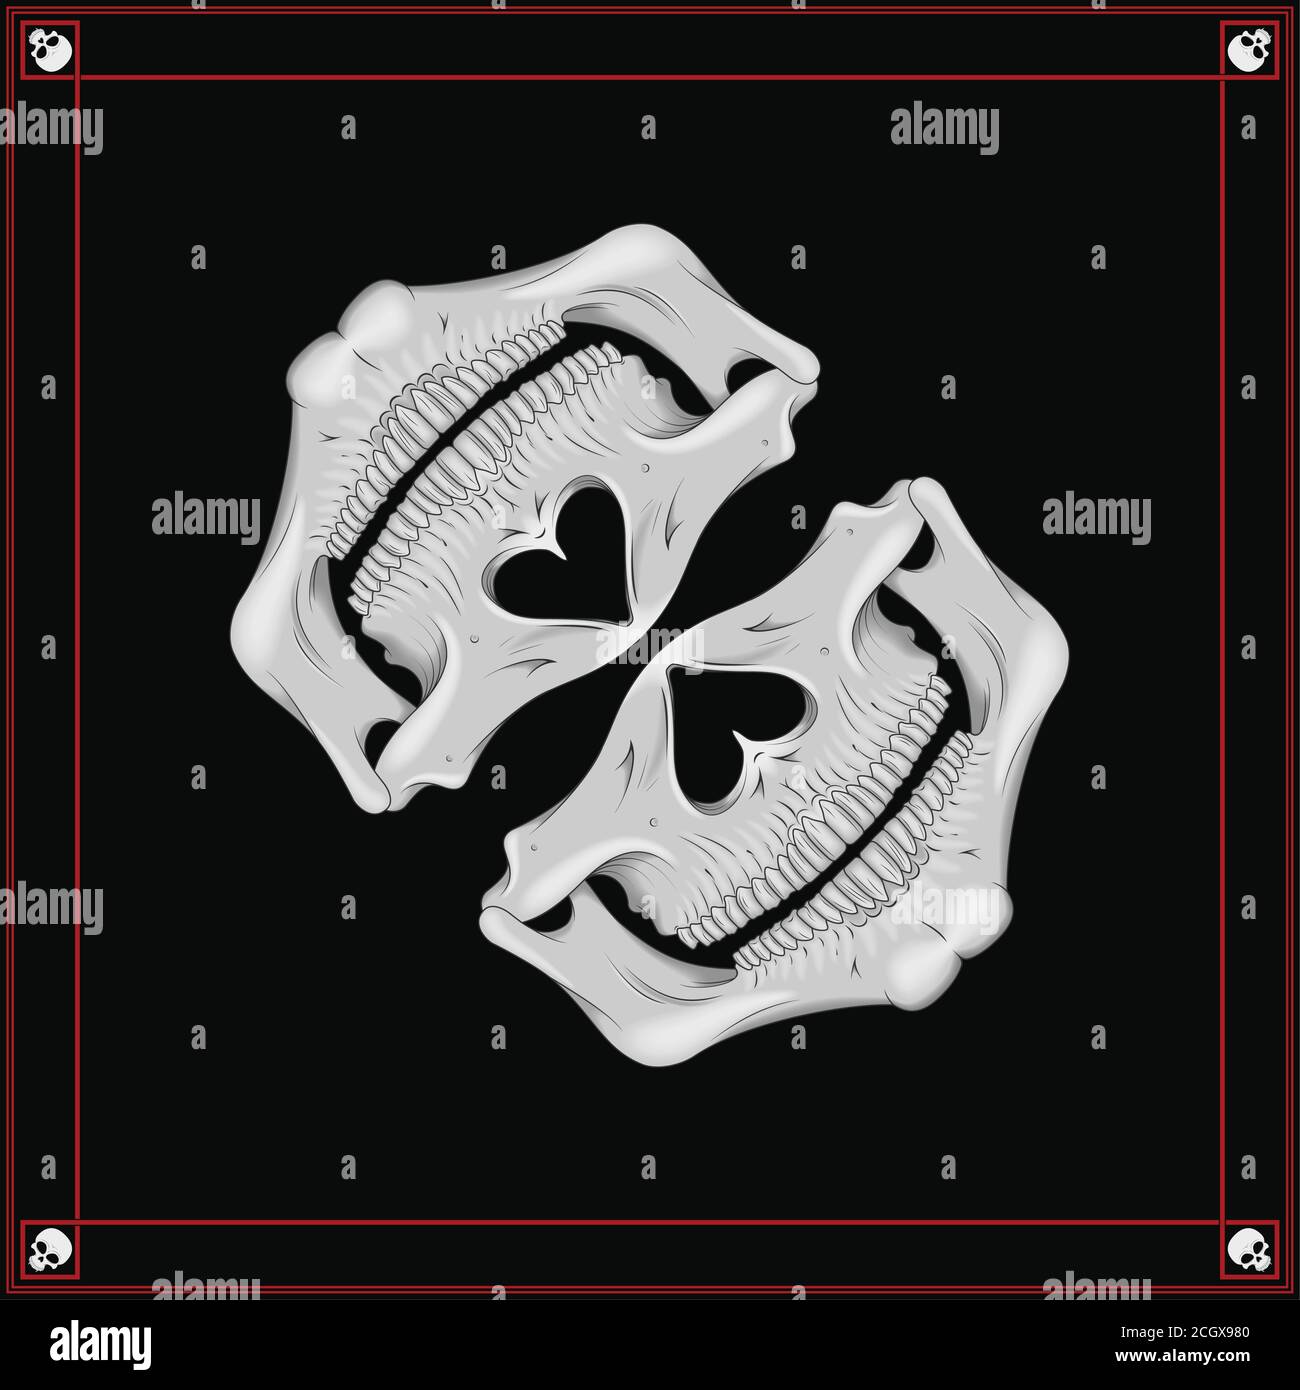 Vector design of bandana with half skull pattern, to be used as mask, cover, all over black background. Stock Vector